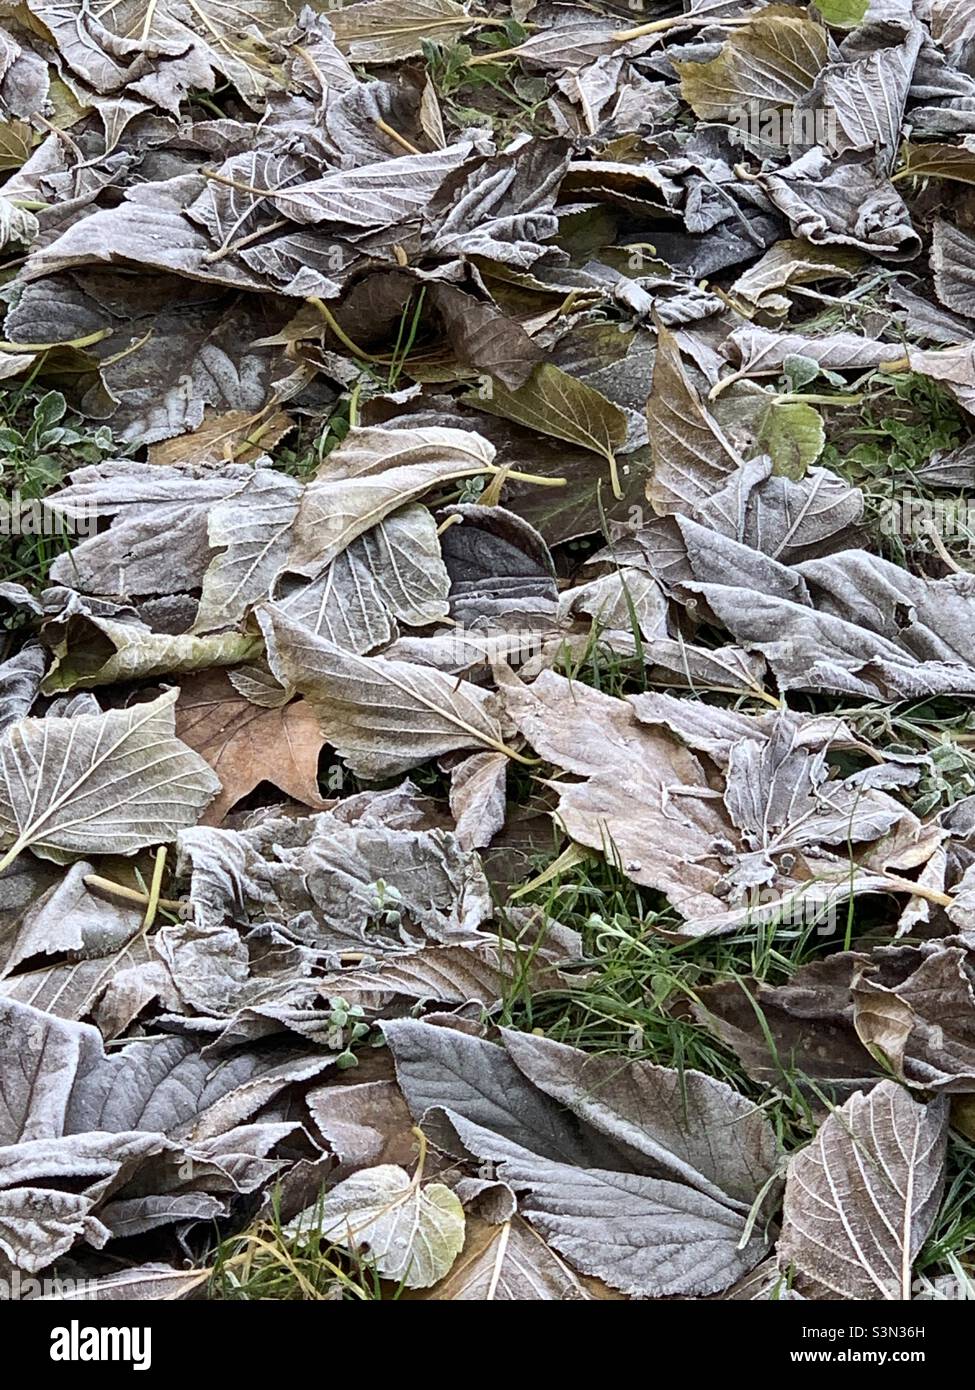 Morning frost on fallen leaves. Stock Photo